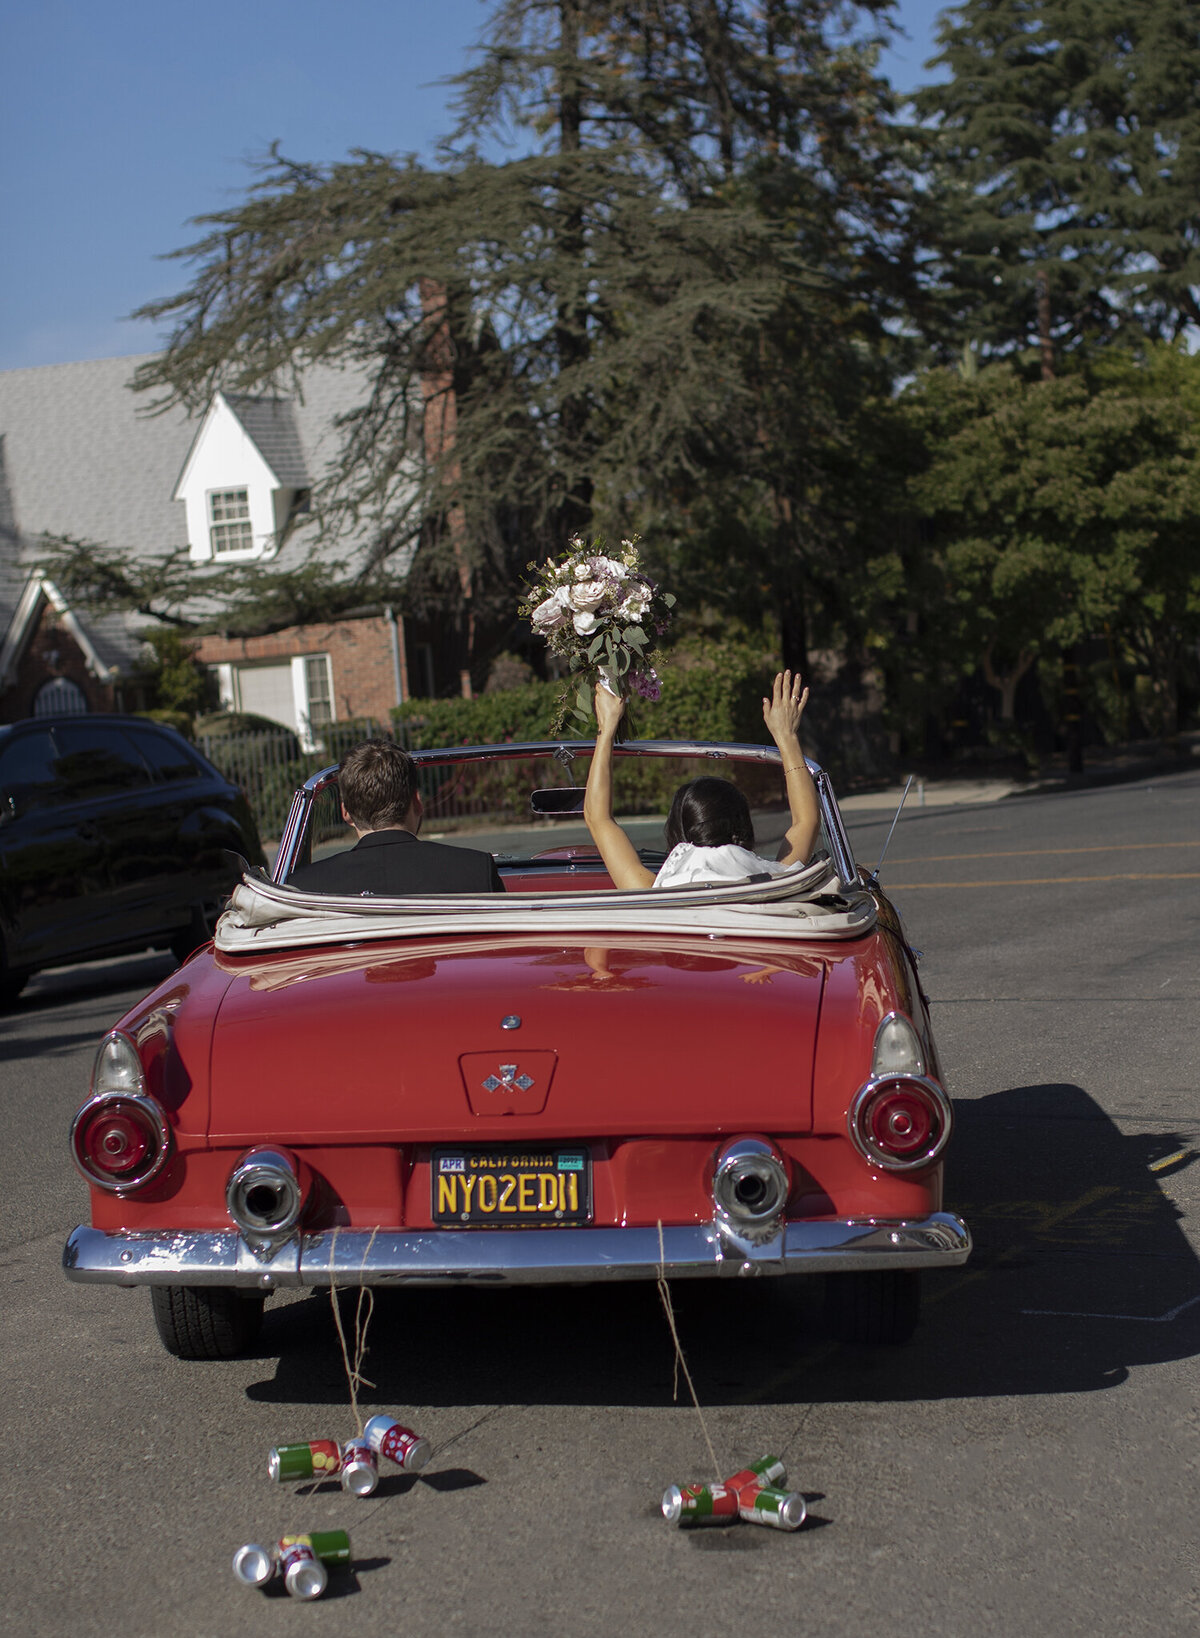 a photo of a bride and groom in a red classic car driving off after the the ceremony